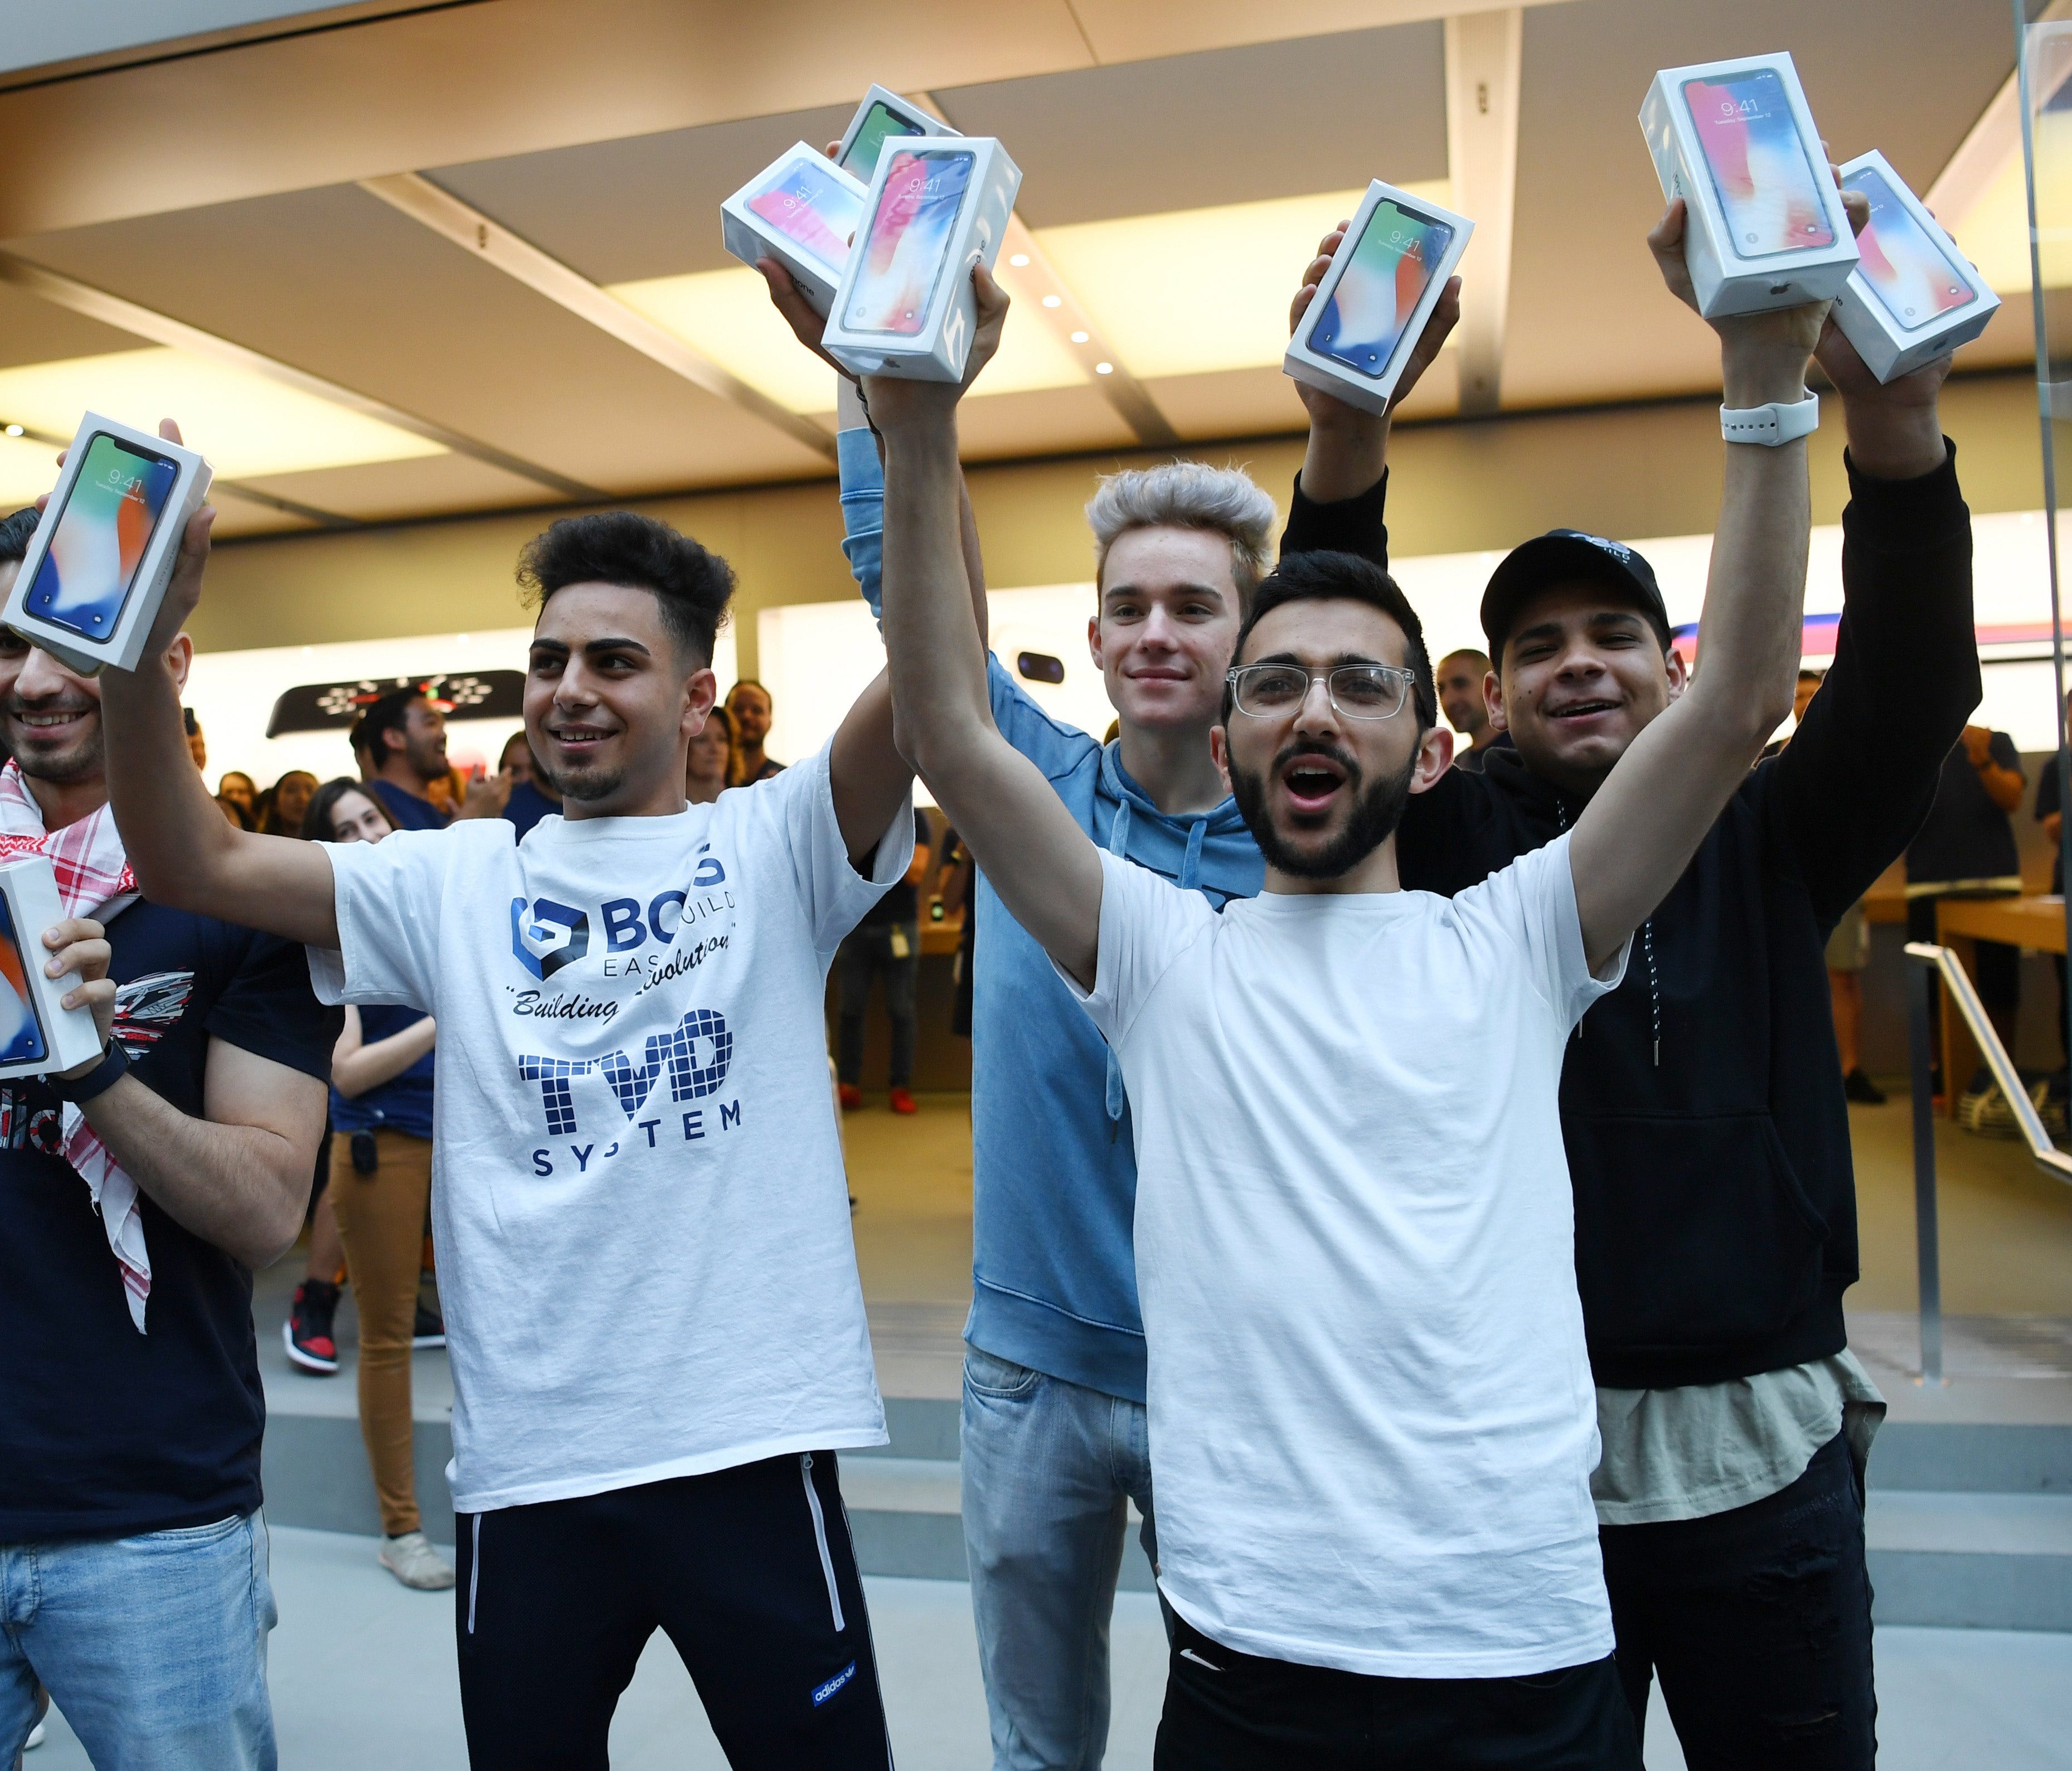 The first purchasers of the iPhone X show off their boxed phones to the media after its release to the public outside the Apple Store in Sydney, Australia.